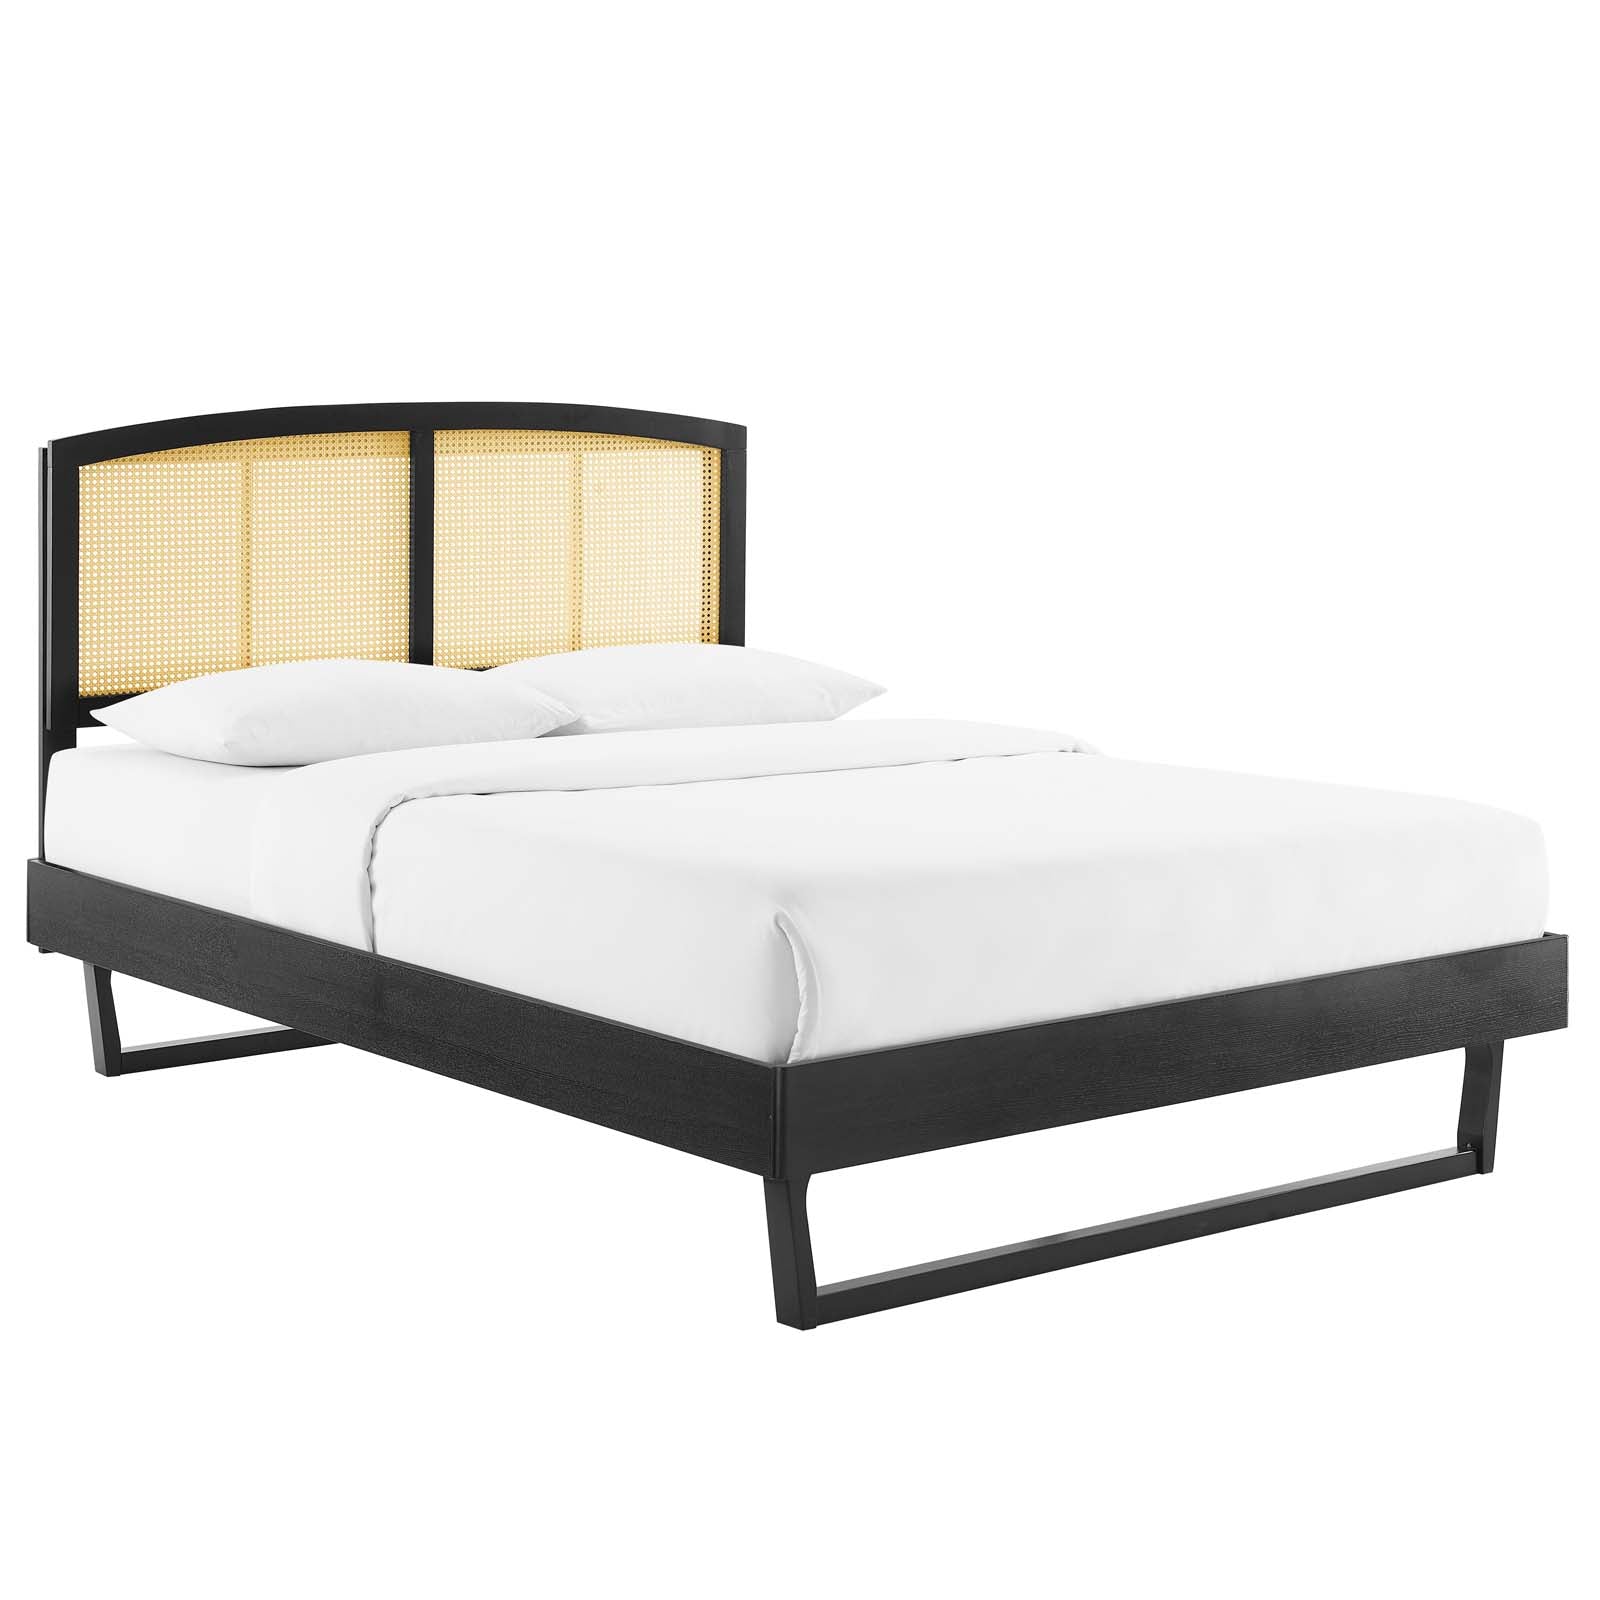 Modway Beds - Sierra-Cane-and-Wood-King-Platform-Bed-With-Angular-Legs-Black